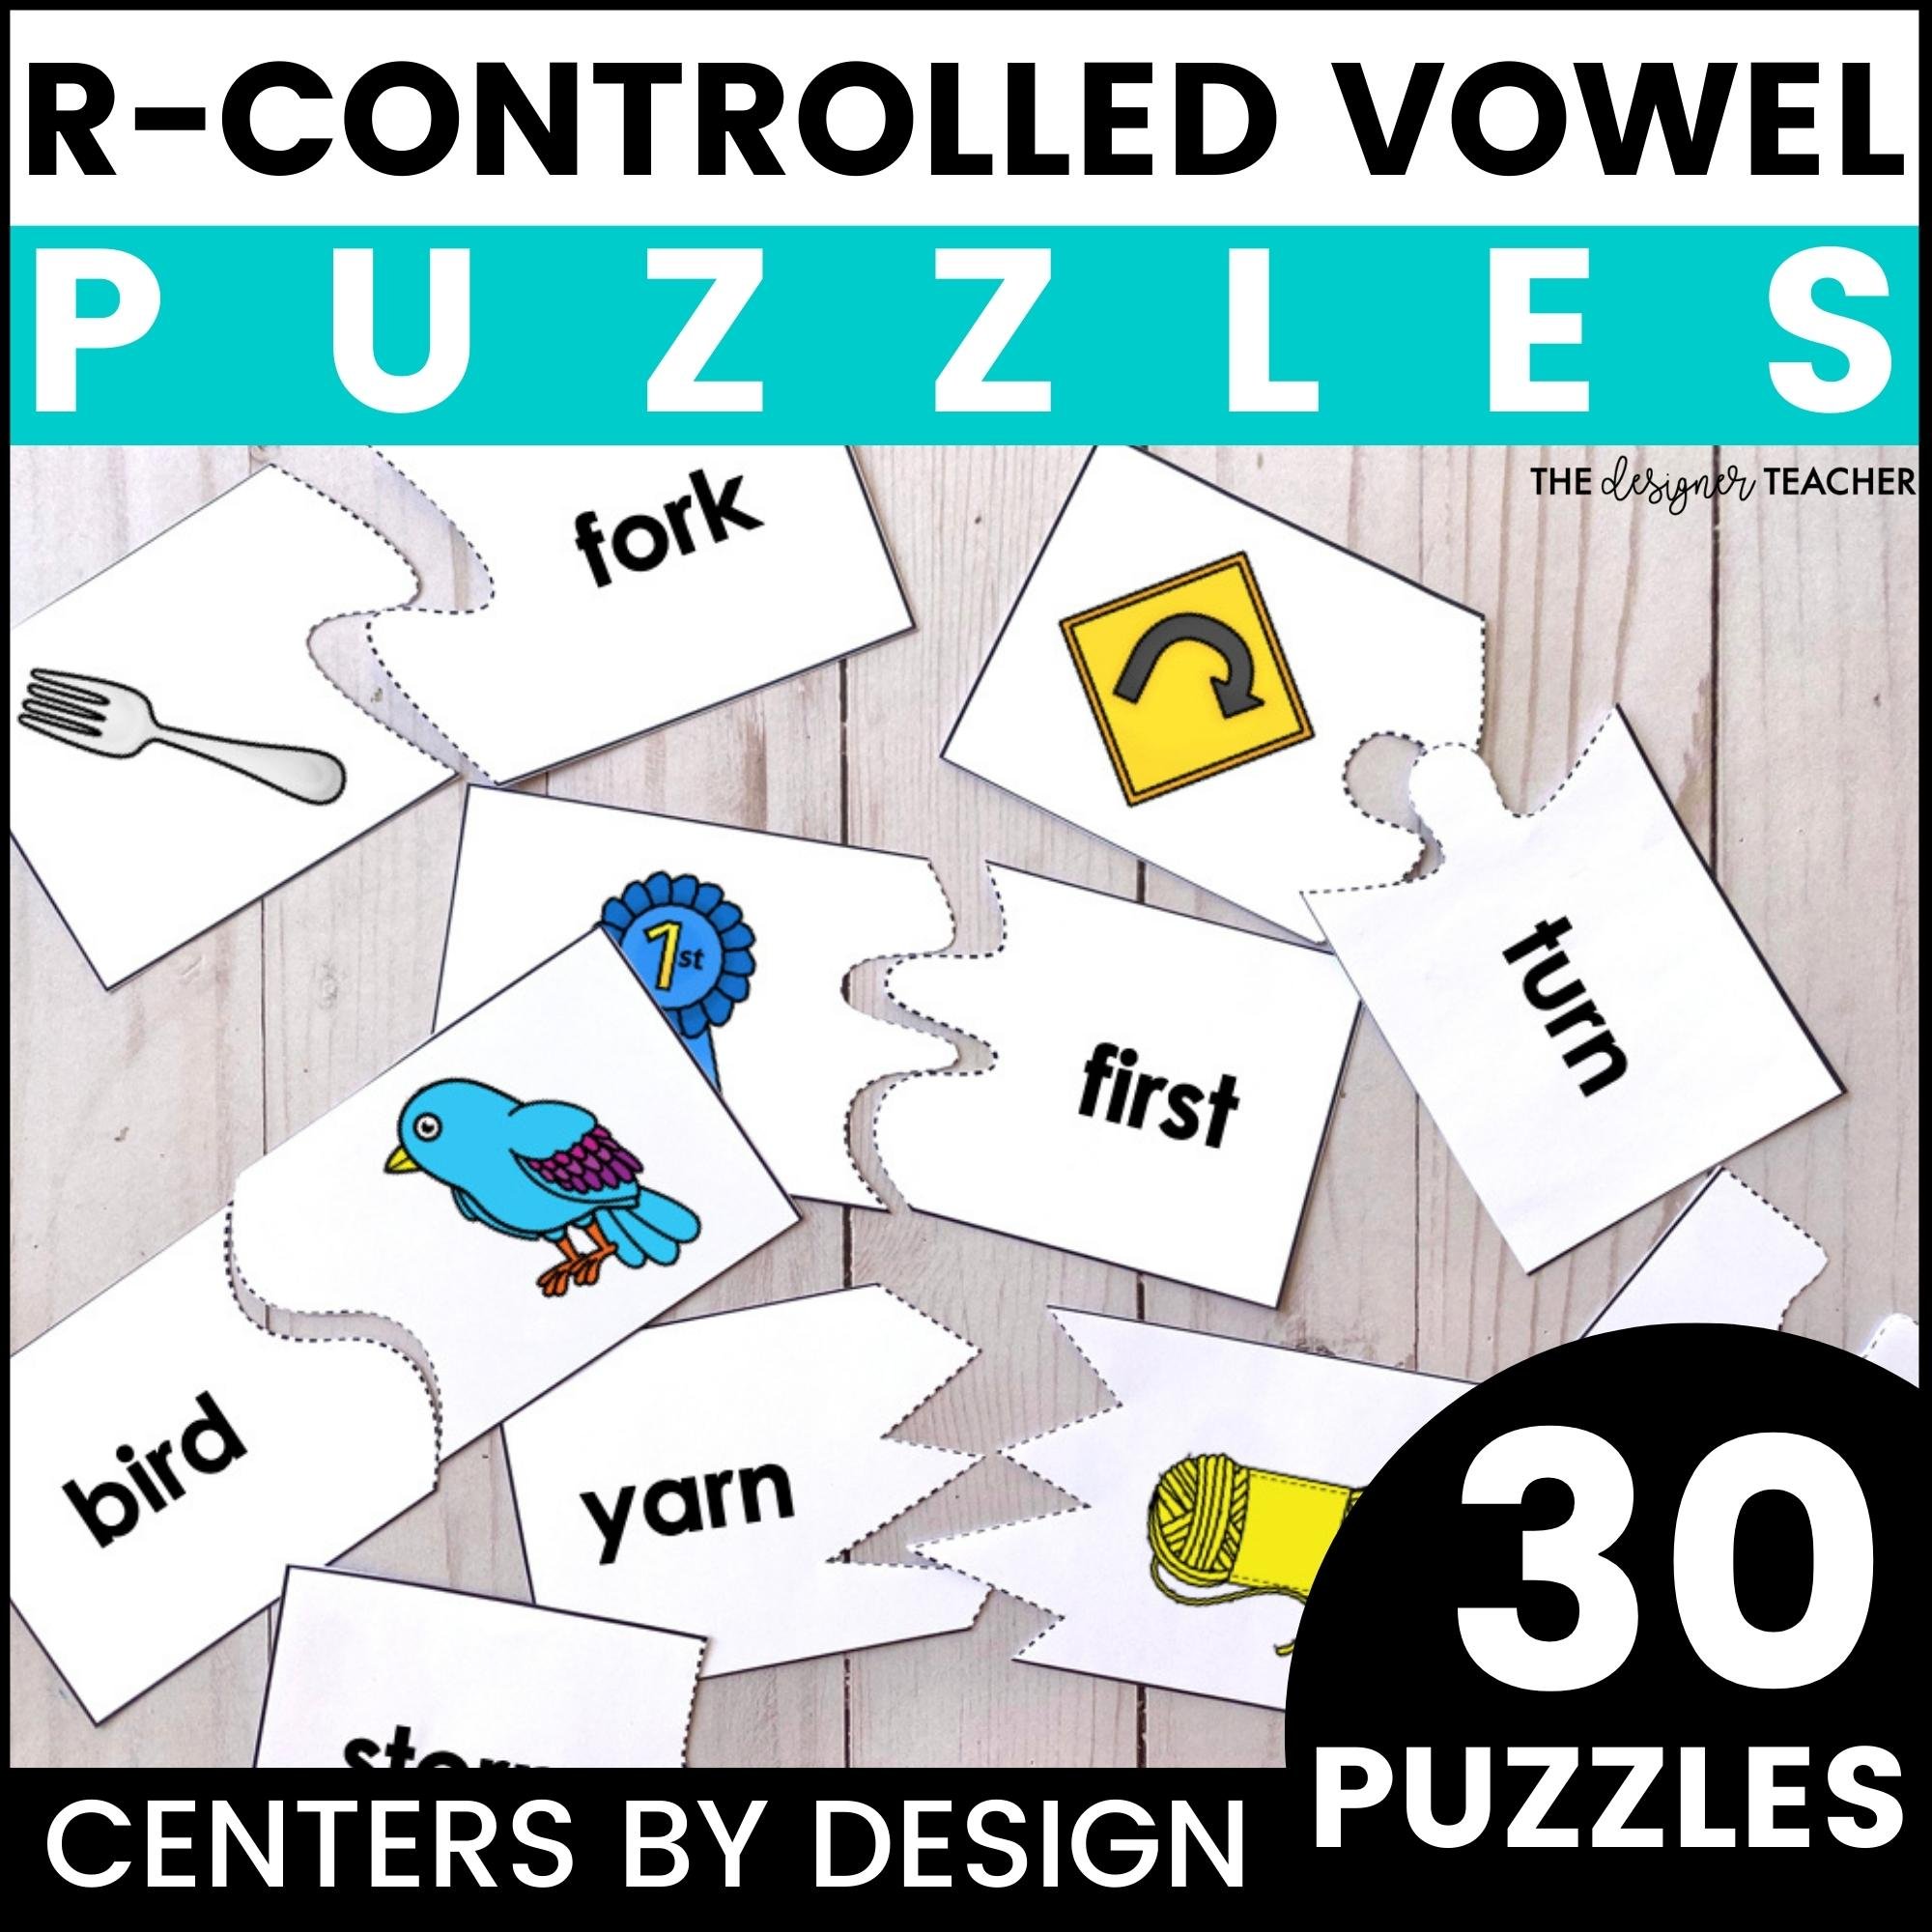 R-CONTROLLED Puzzle Cover.jpg